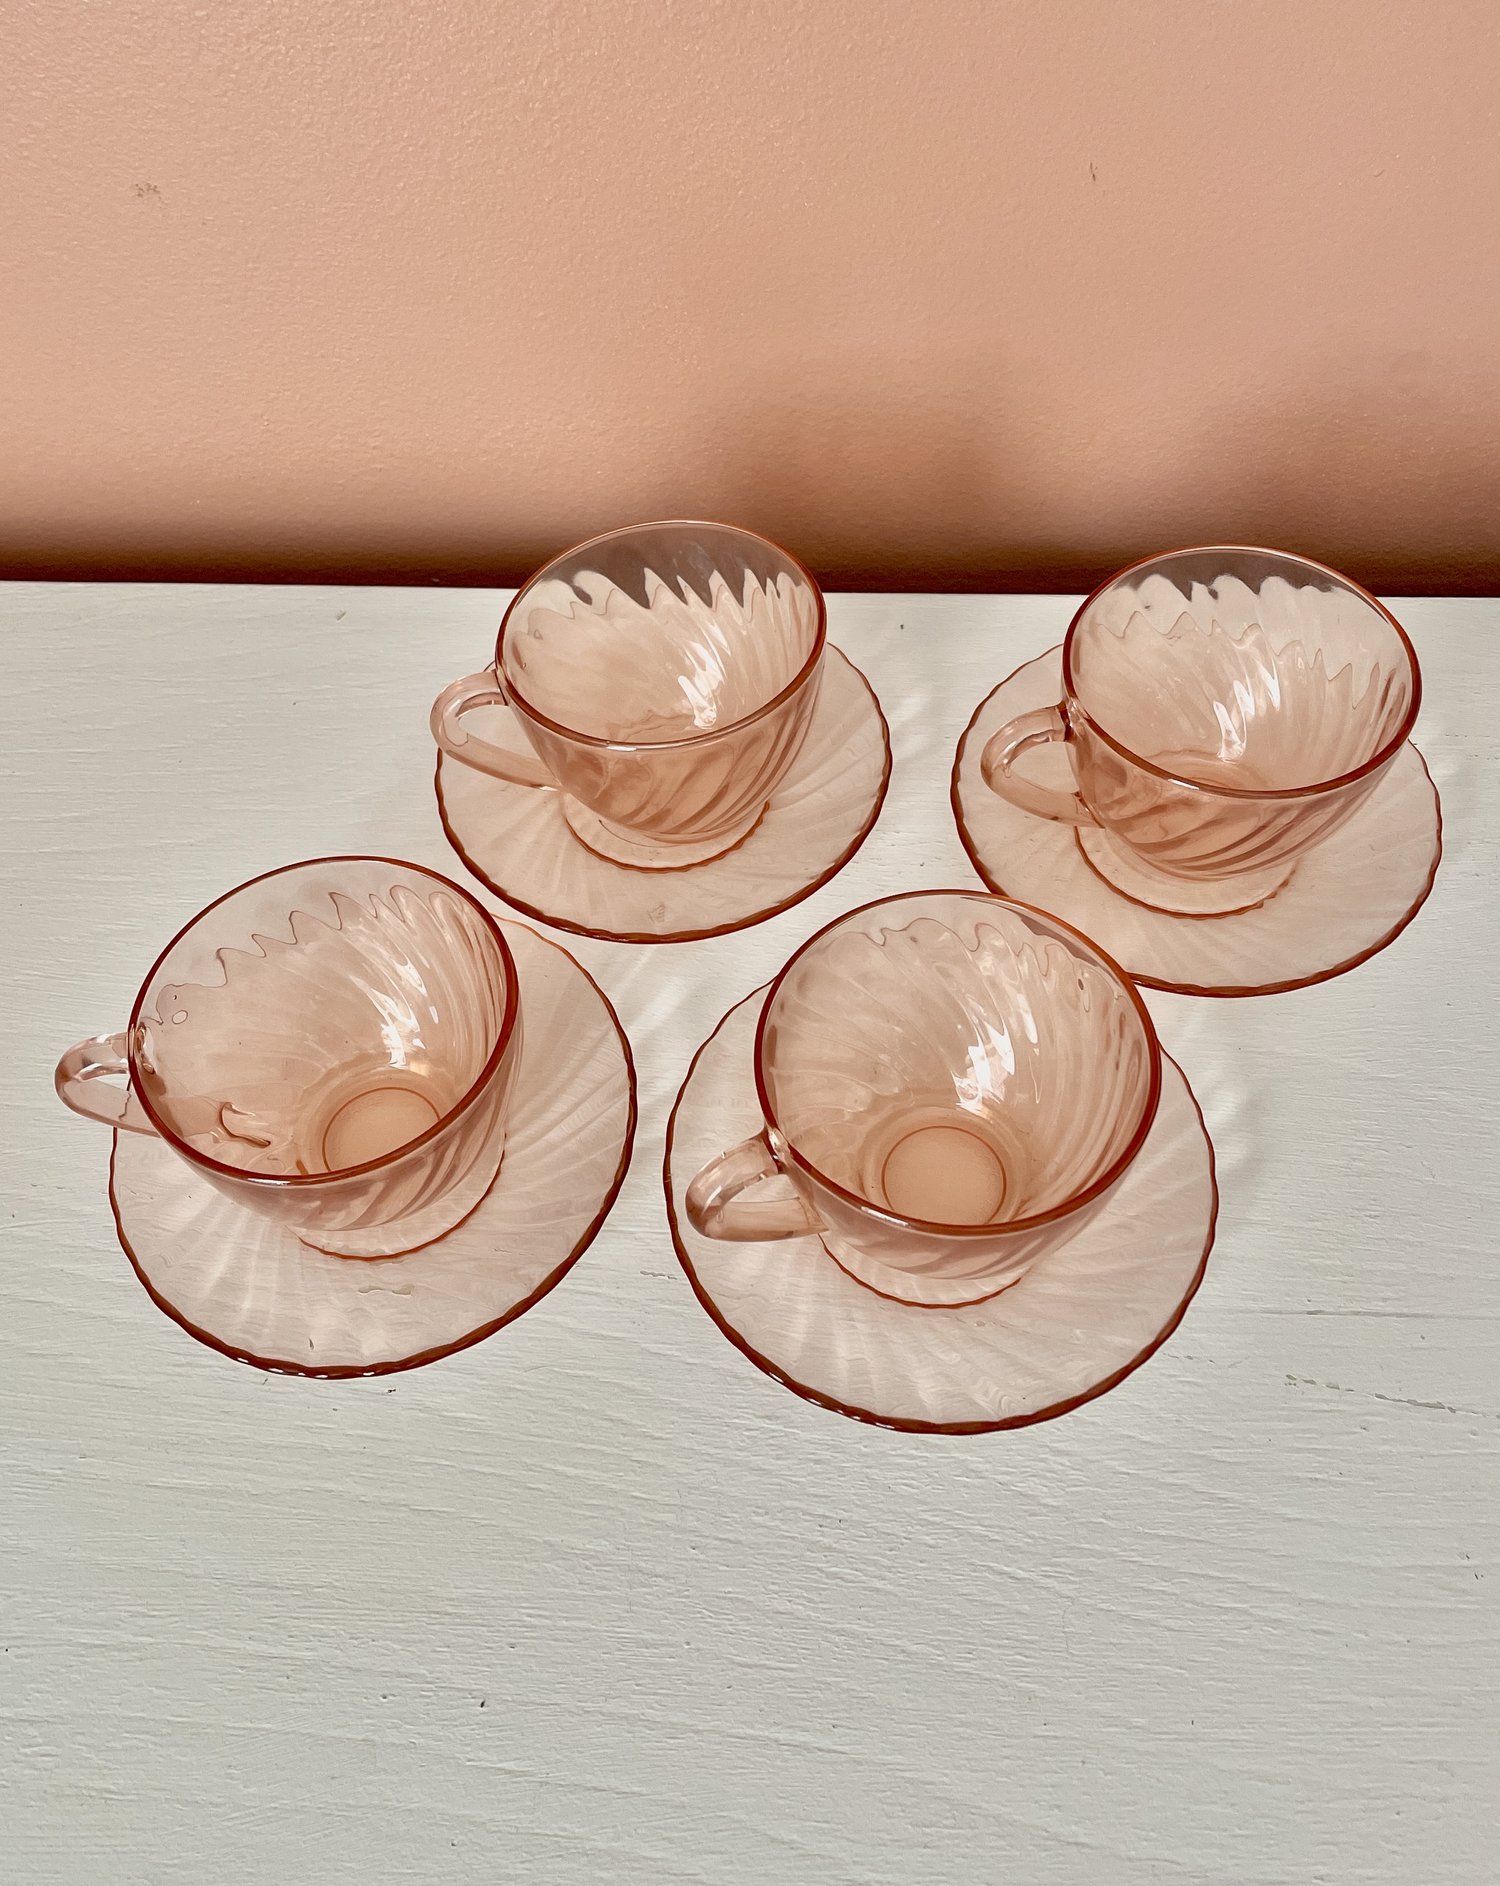 Arcoroc pink glass tea cups and saucers, France.